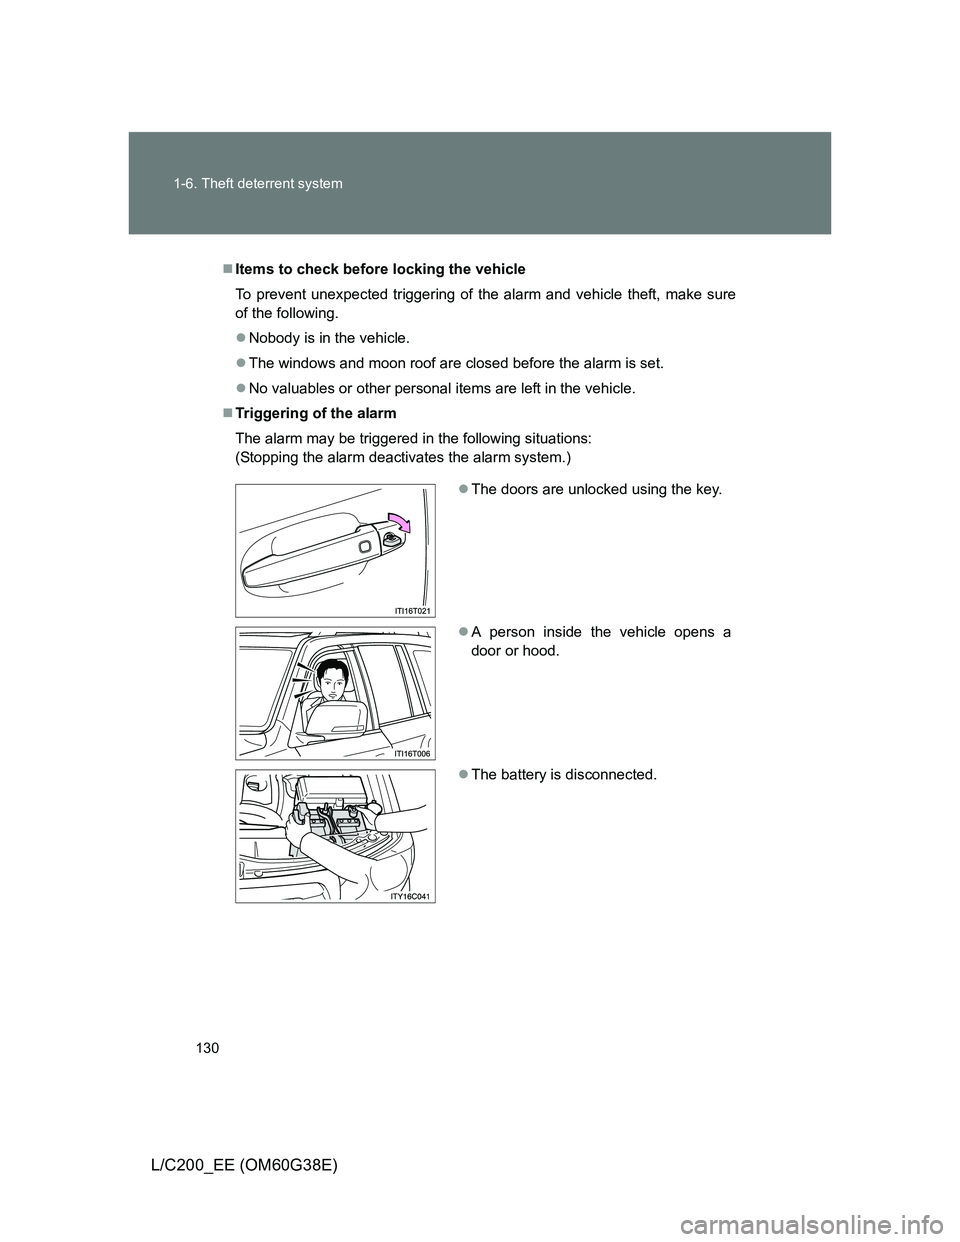 TOYOTA LAND CRUISER 2012  Owners Manual 130 1-6. Theft deterrent system
L/C200_EE (OM60G38E)
Items to check before locking the vehicle
To prevent unexpected triggering of the alarm and vehicle theft, make sure
of the following.
Nobody